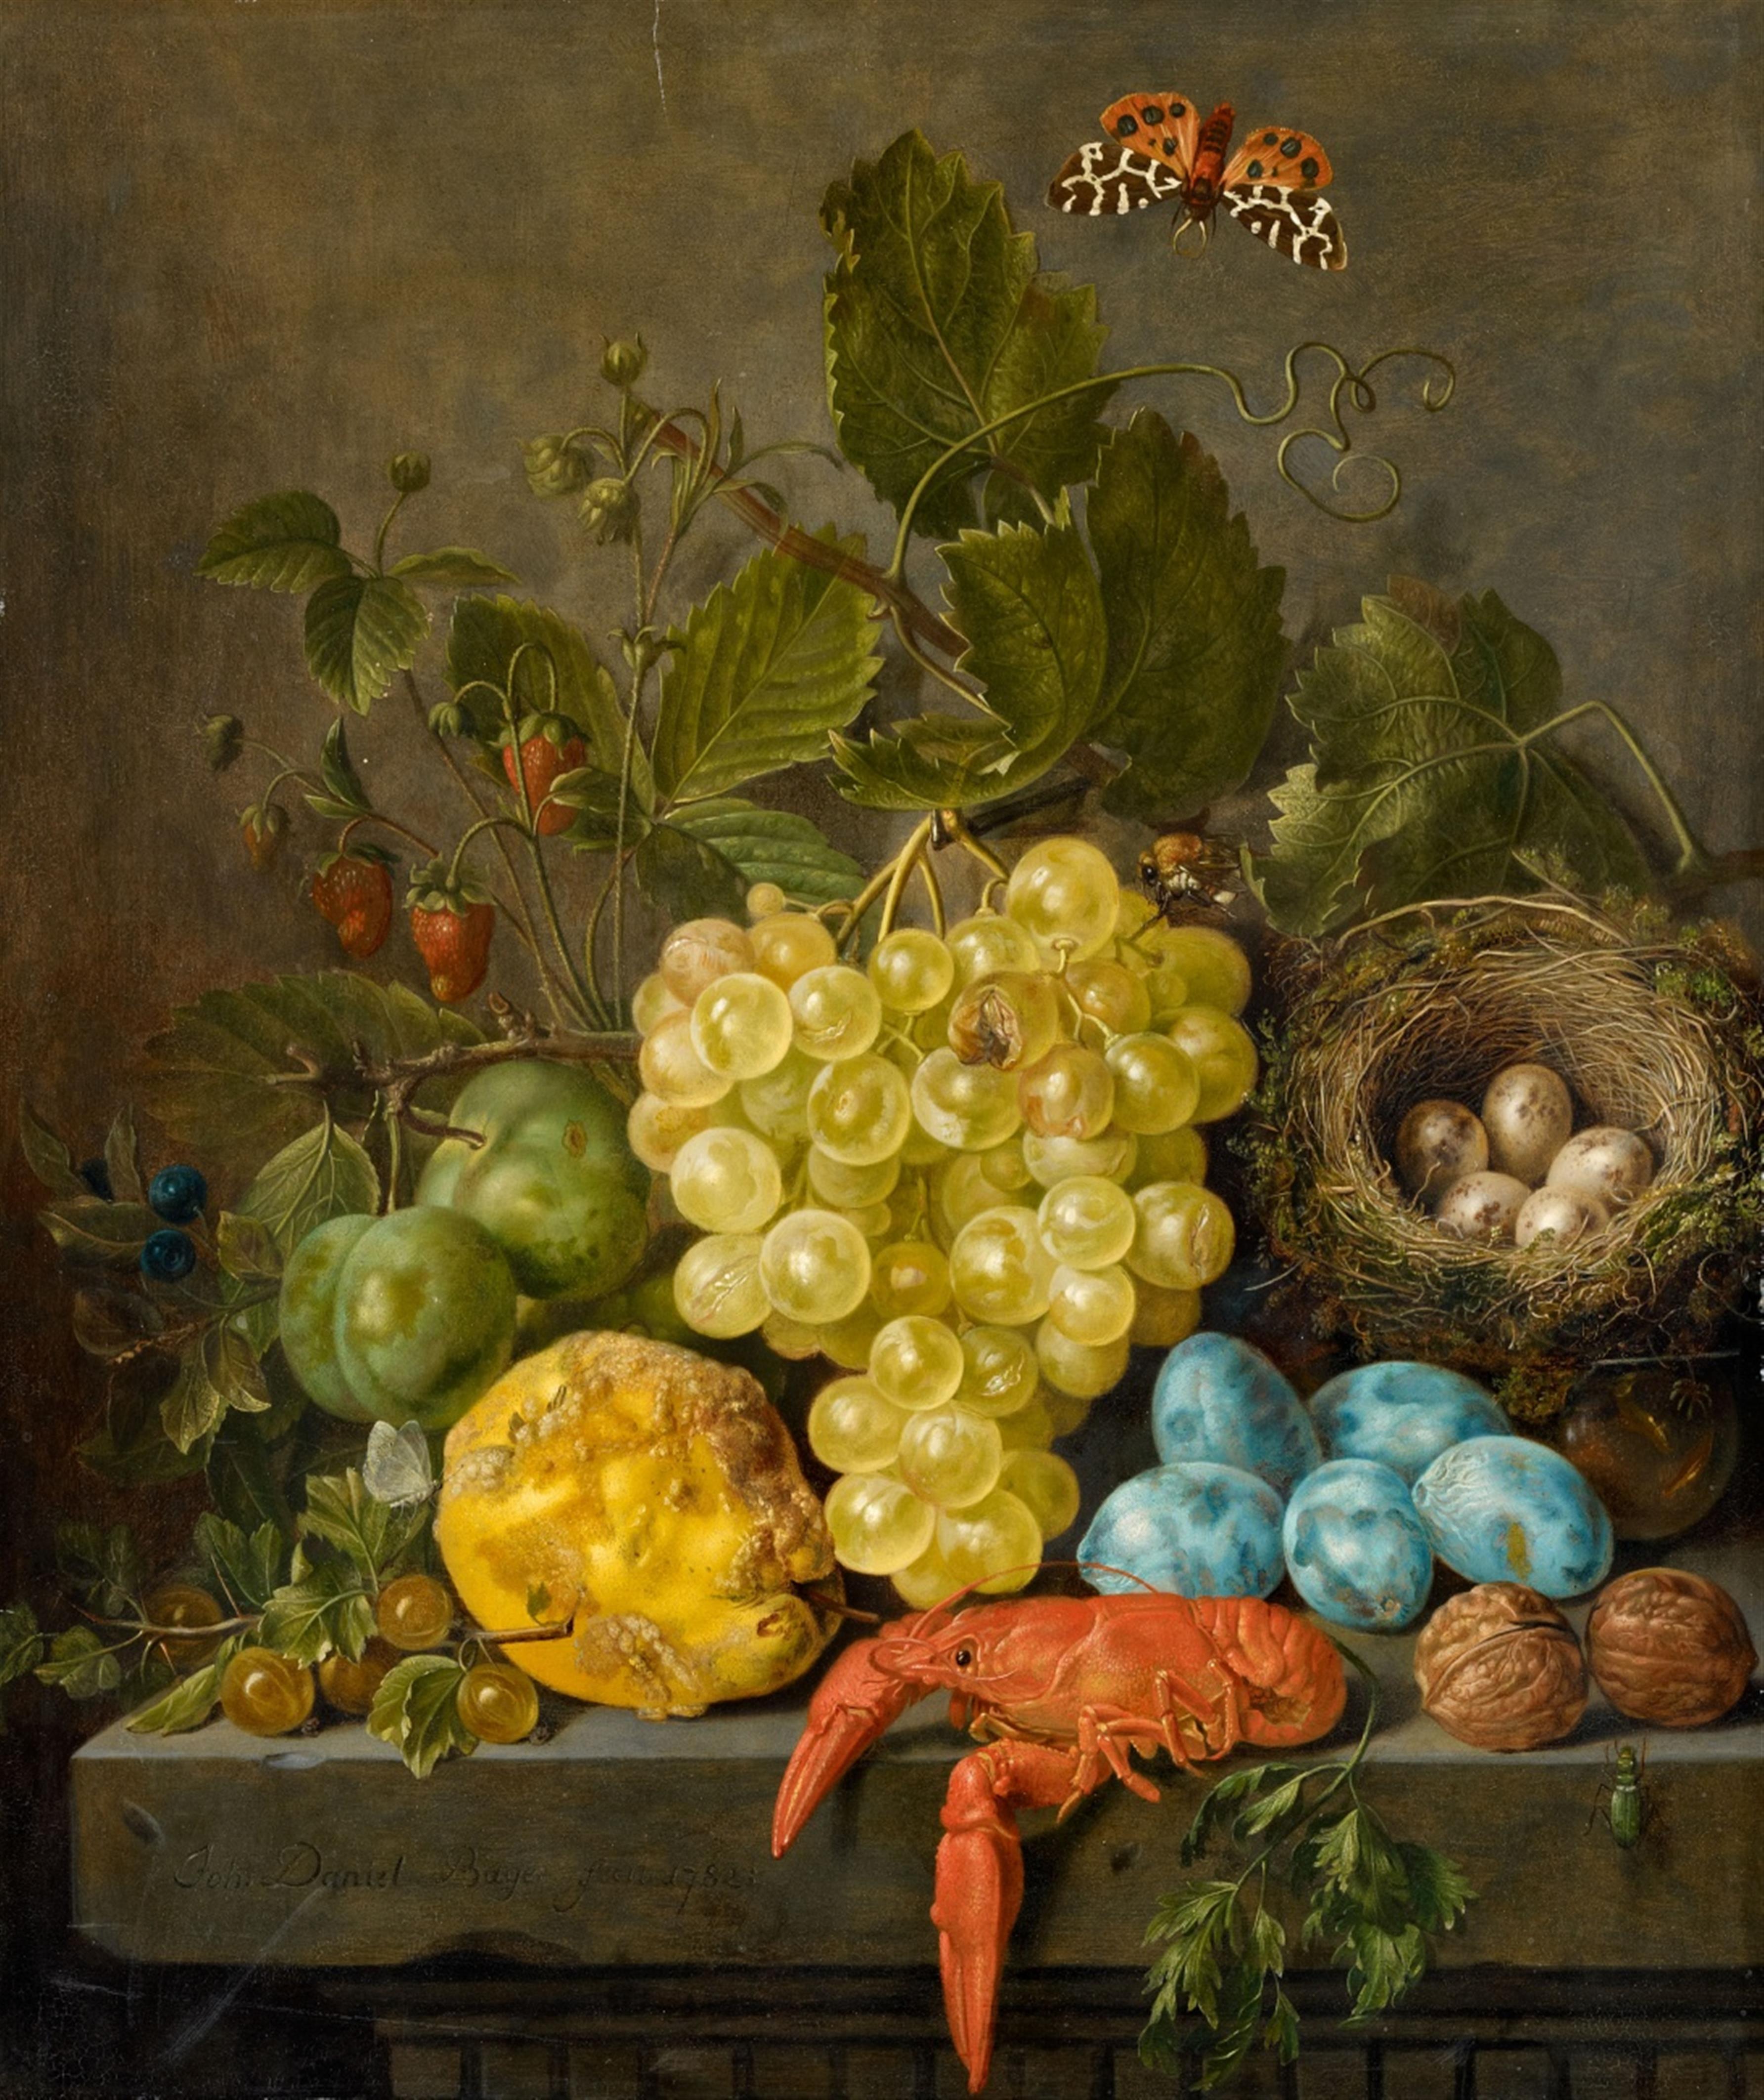 Johann Daniel Bager - Still Life with Fruit, Crab, Insects and a Bird's Nest on a Stone Table - image-1